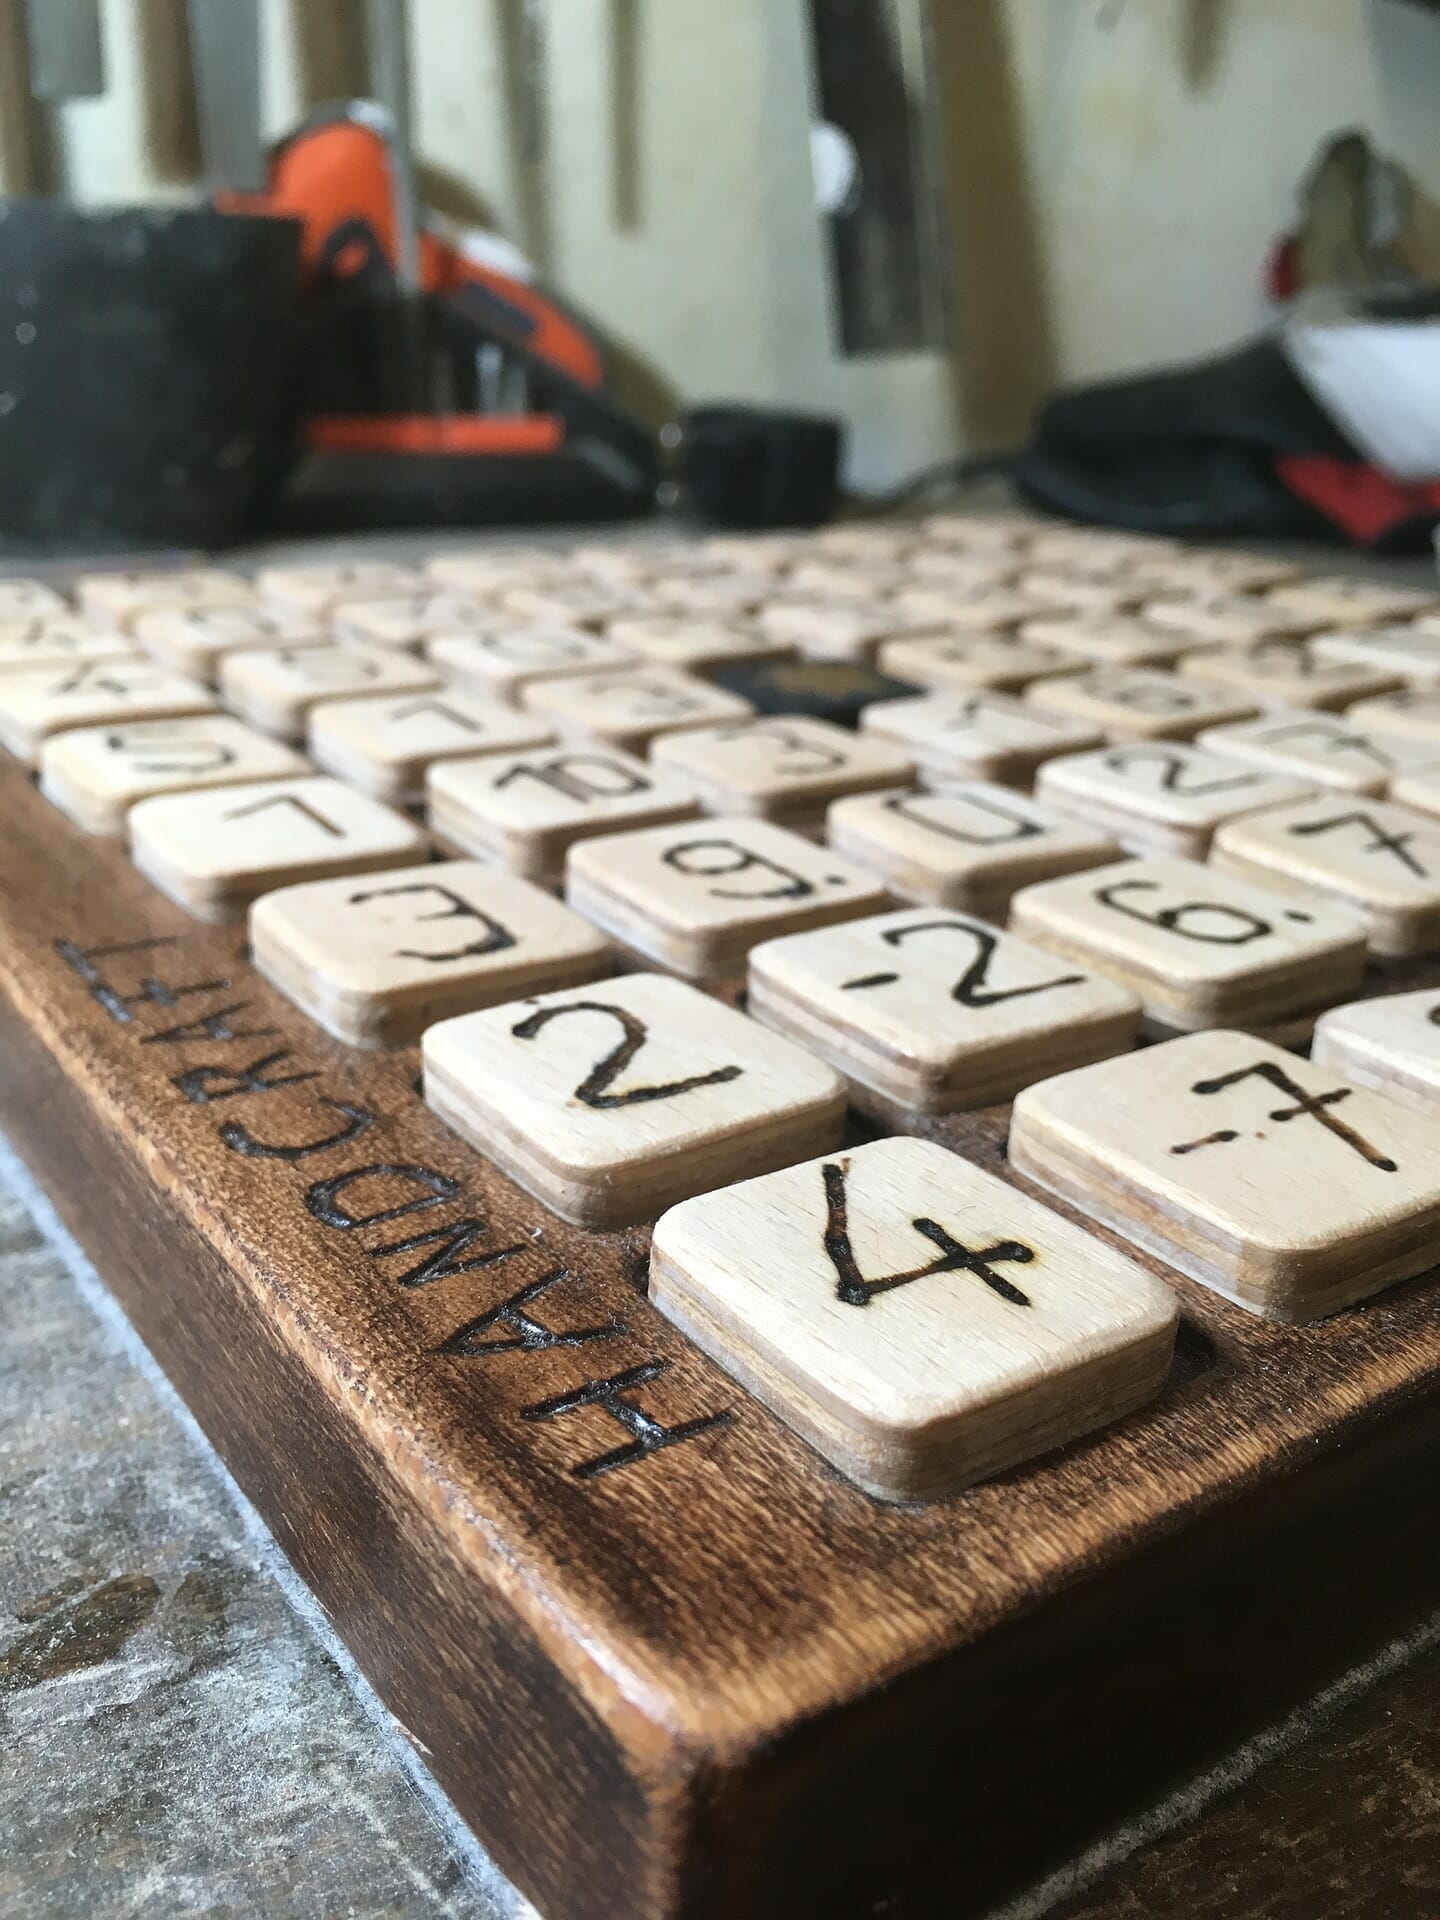 Home made numbers game made out of wood